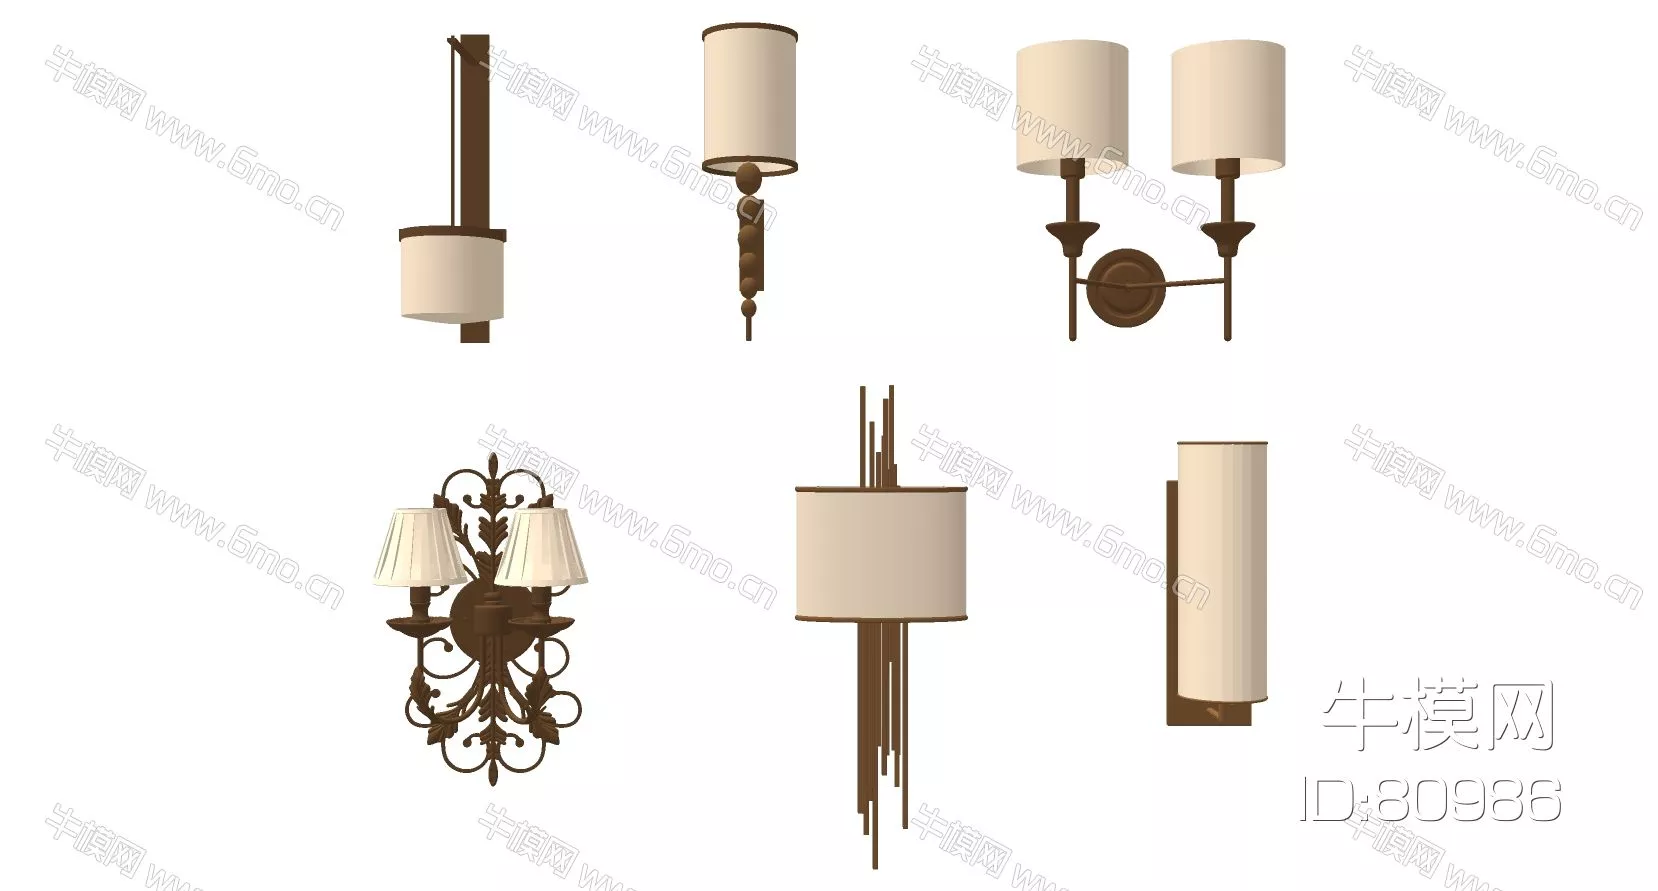 EUROPE WALL LAMP - SKETCHUP 3D MODEL - ENSCAPE - 80986